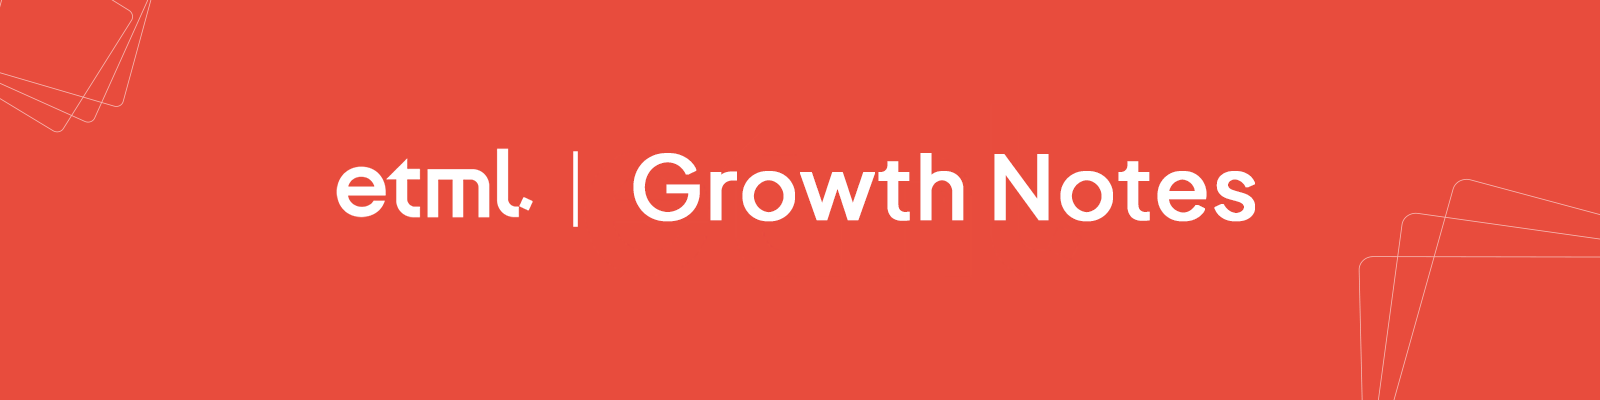 Growth Notes February